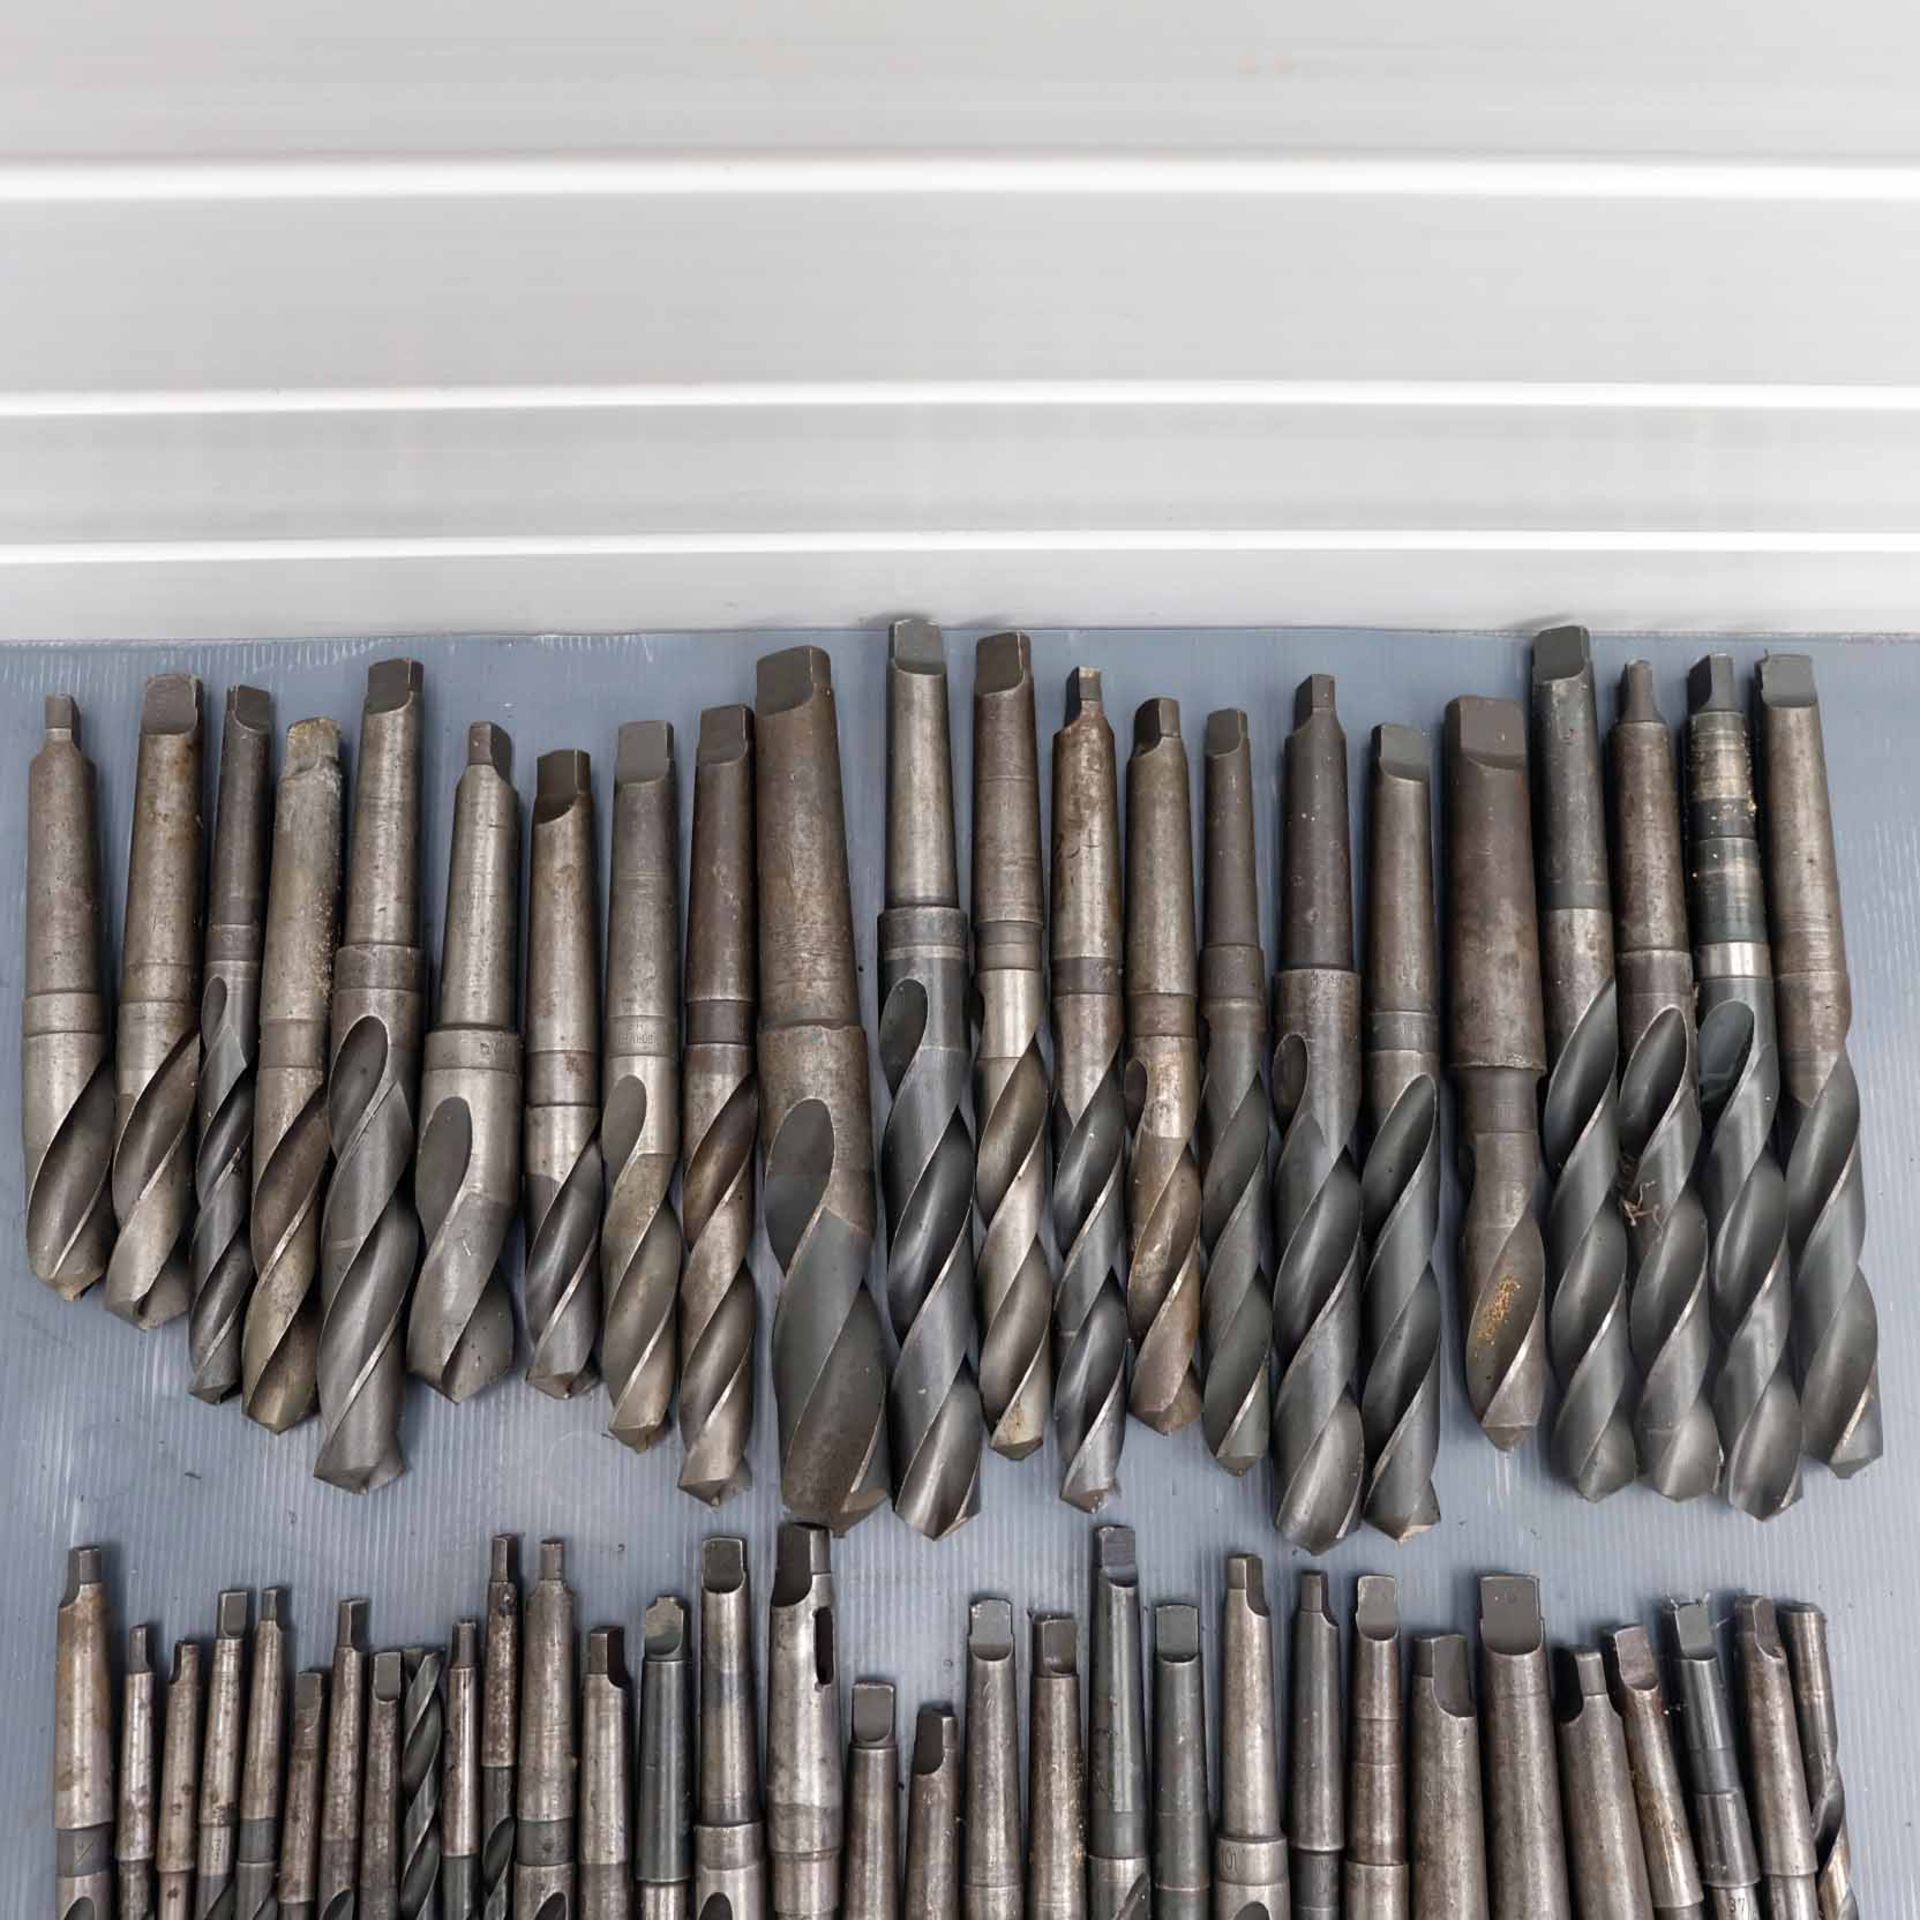 Quantity of Twist Drills. Various Sizes. 1 - 4 MT & Straight Shank. - Image 2 of 3